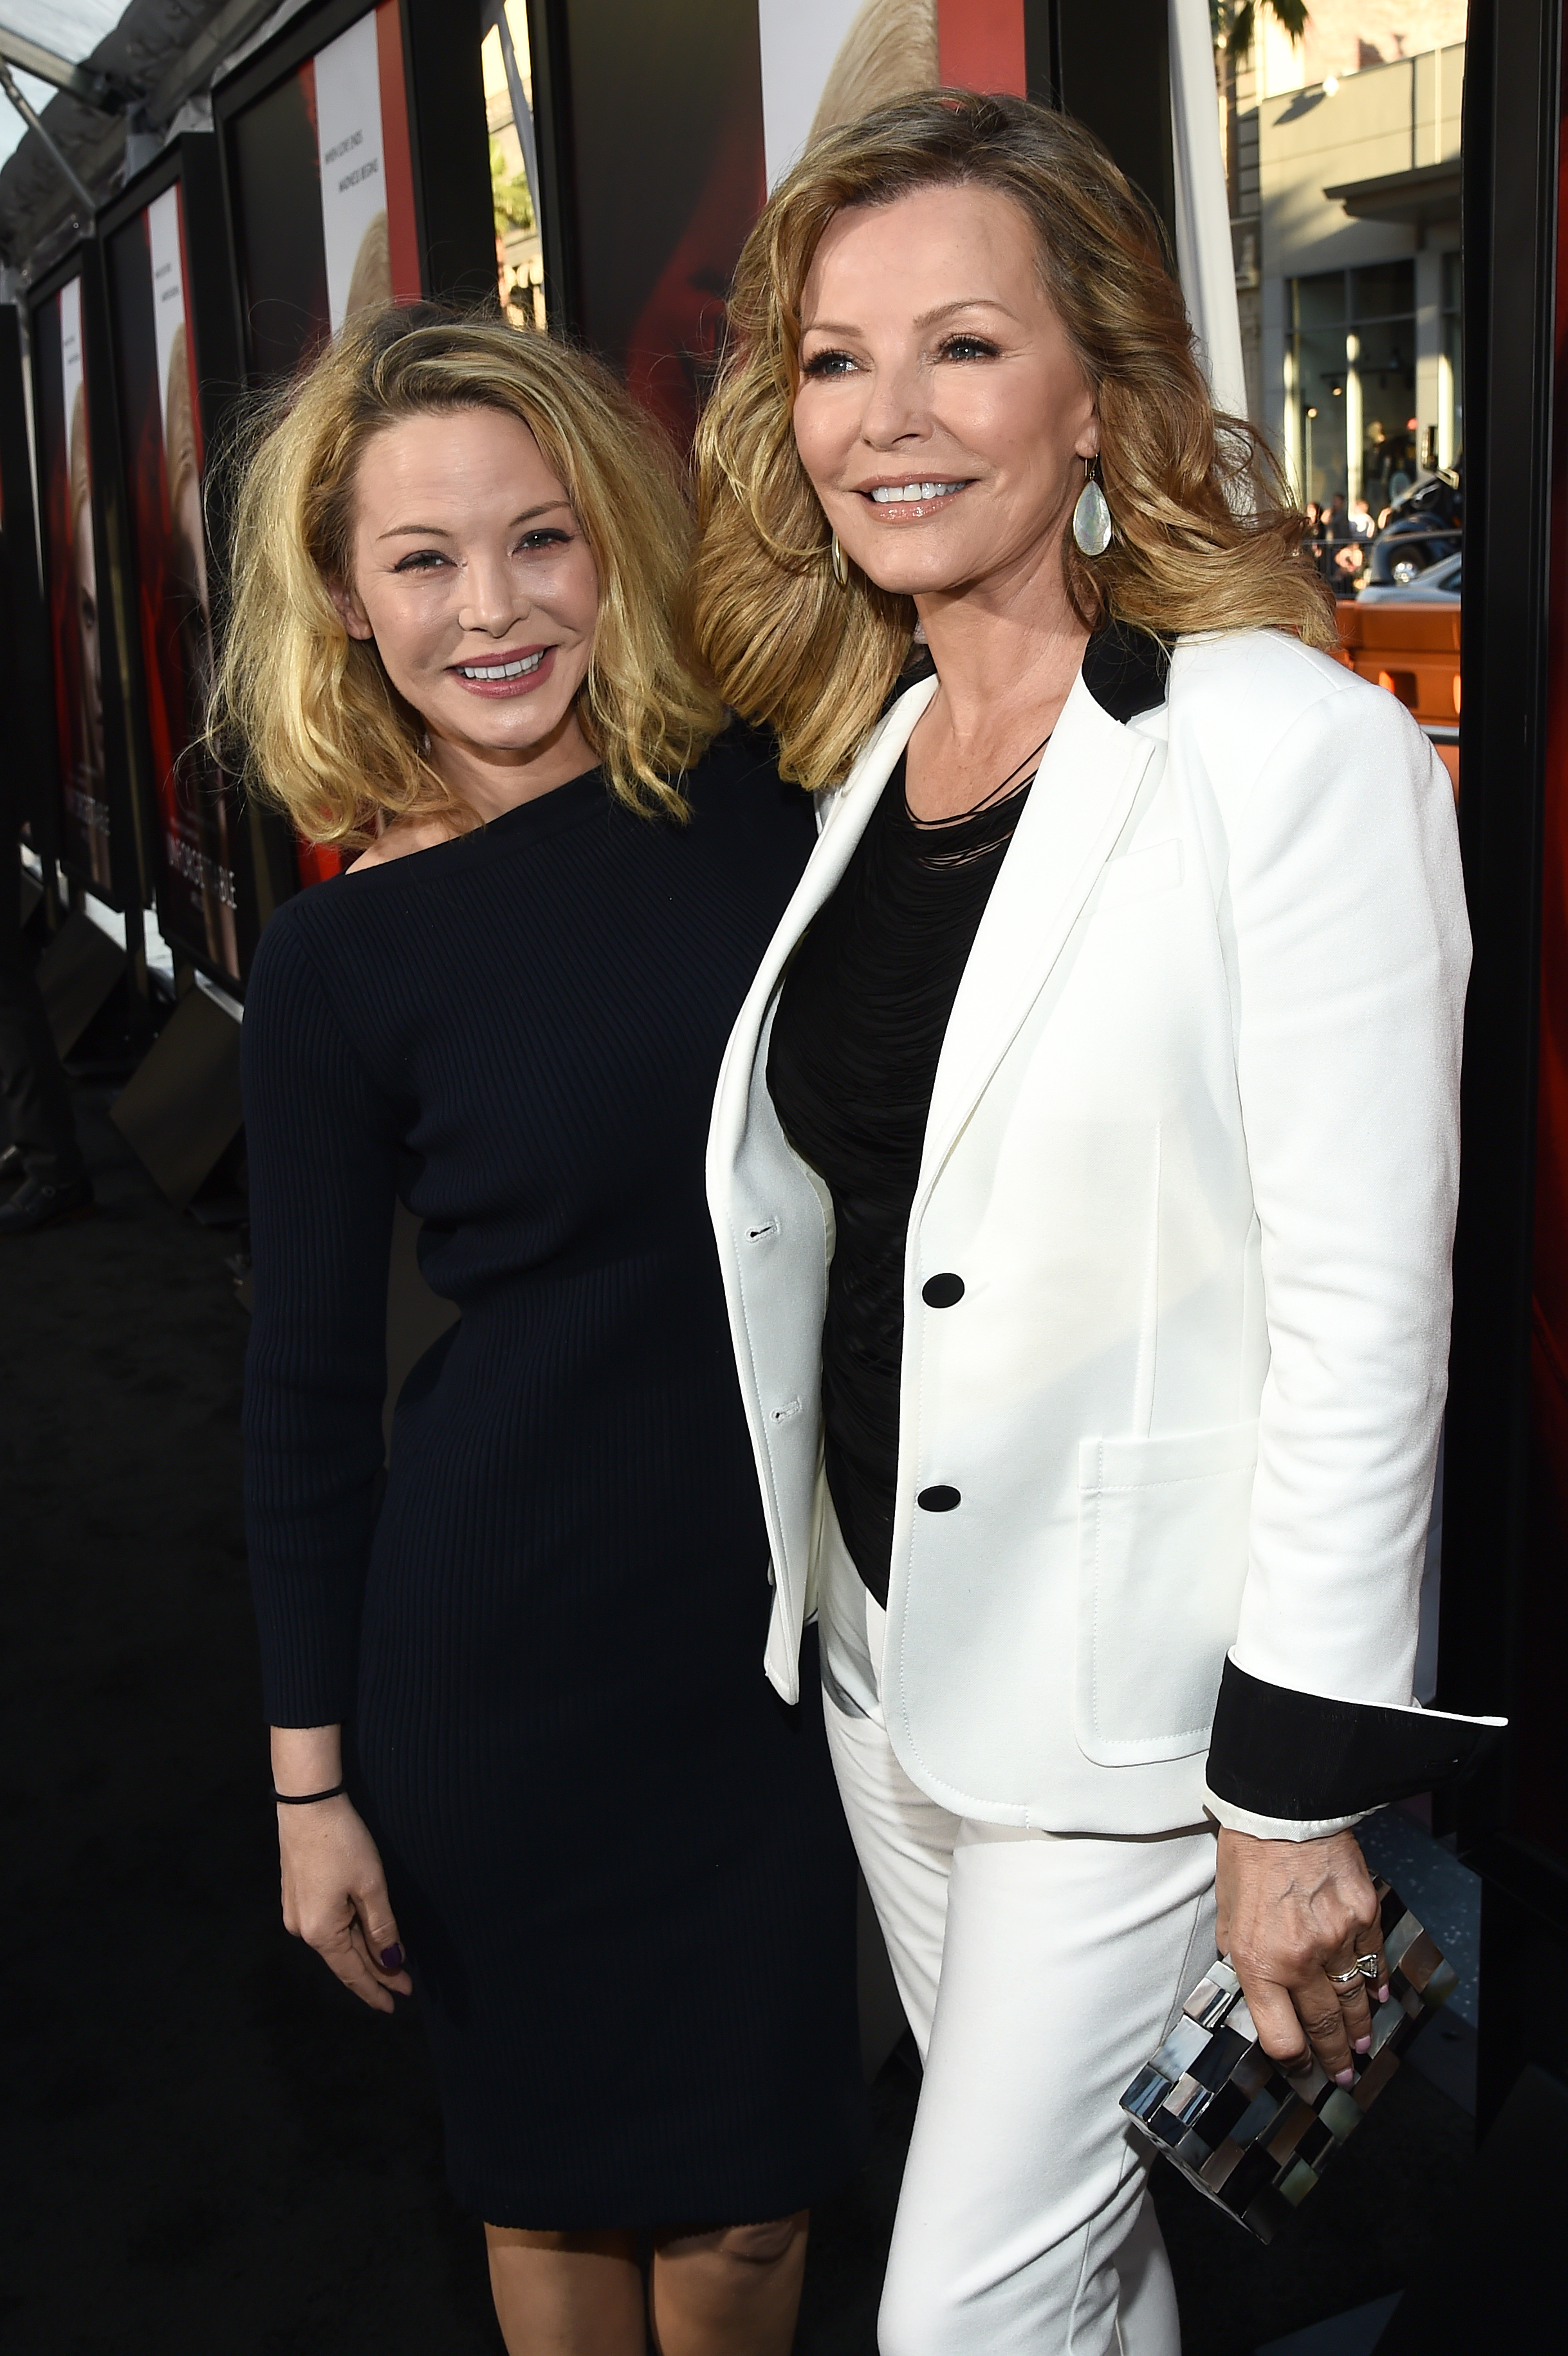 Cheryl Ladd and her daughter Jordan in Los Angeles in 2017 | Source: Getty Images